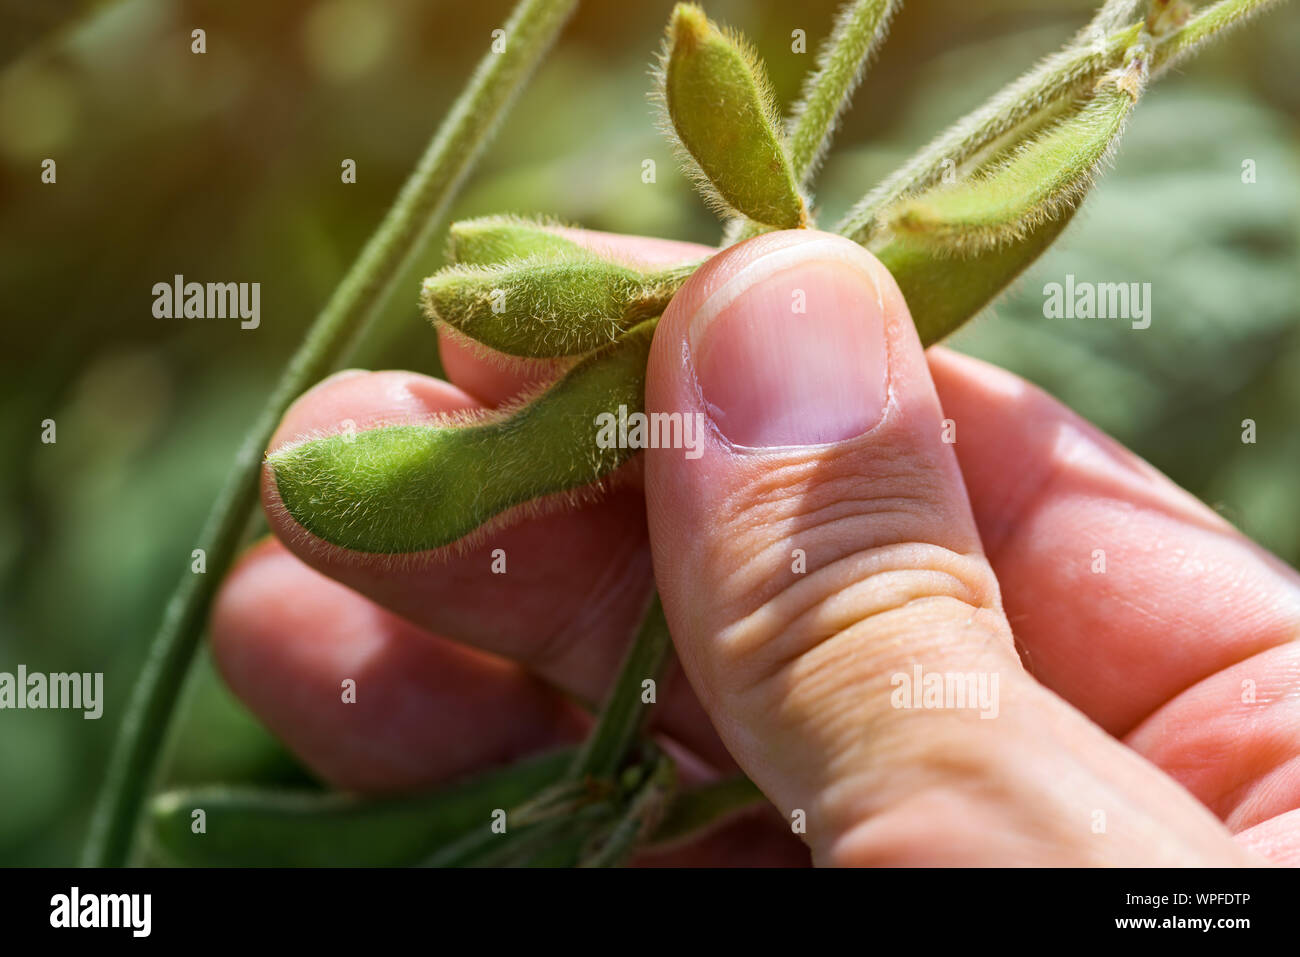 Agronomist examining soybean pod development, close up of fingers holding crop Stock Photo